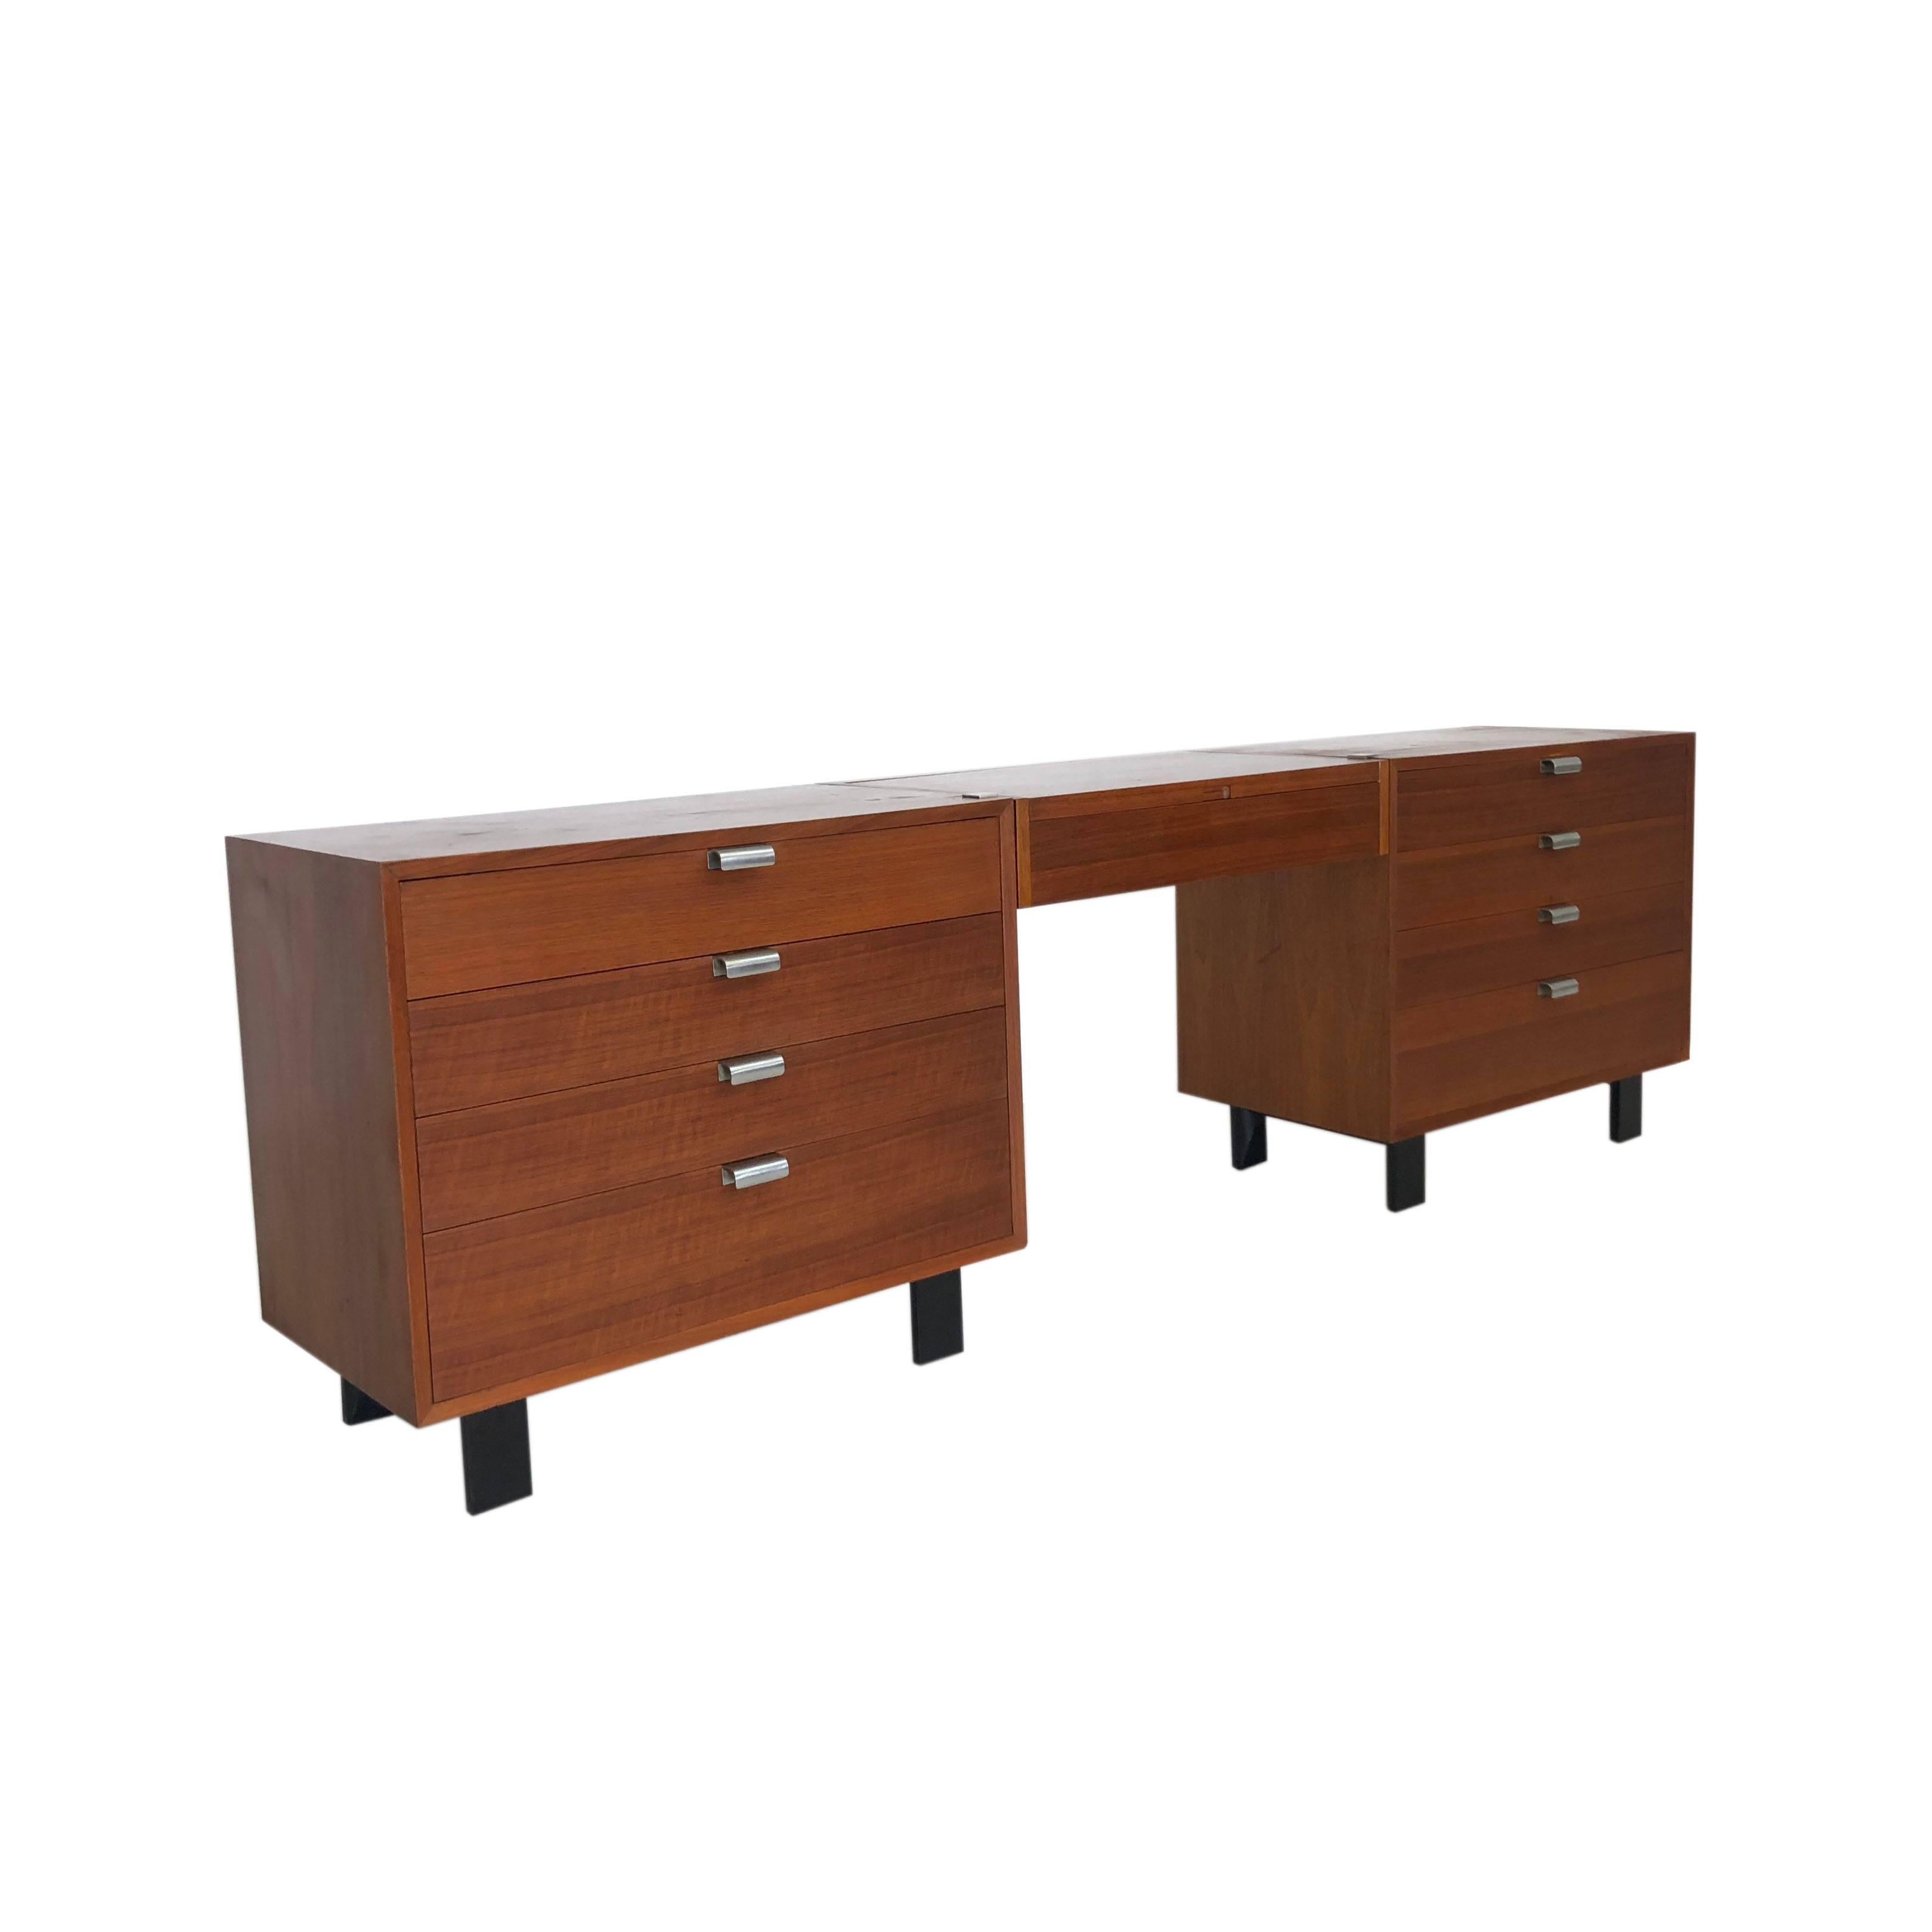 Mid-Century Modern dresserpart of the basic storage components that George Nelson designed for Herman Miller in 1952, this extraordinary set comprises two dressers with black legs in a warm walnut on either side of a suspended vanity.

Each